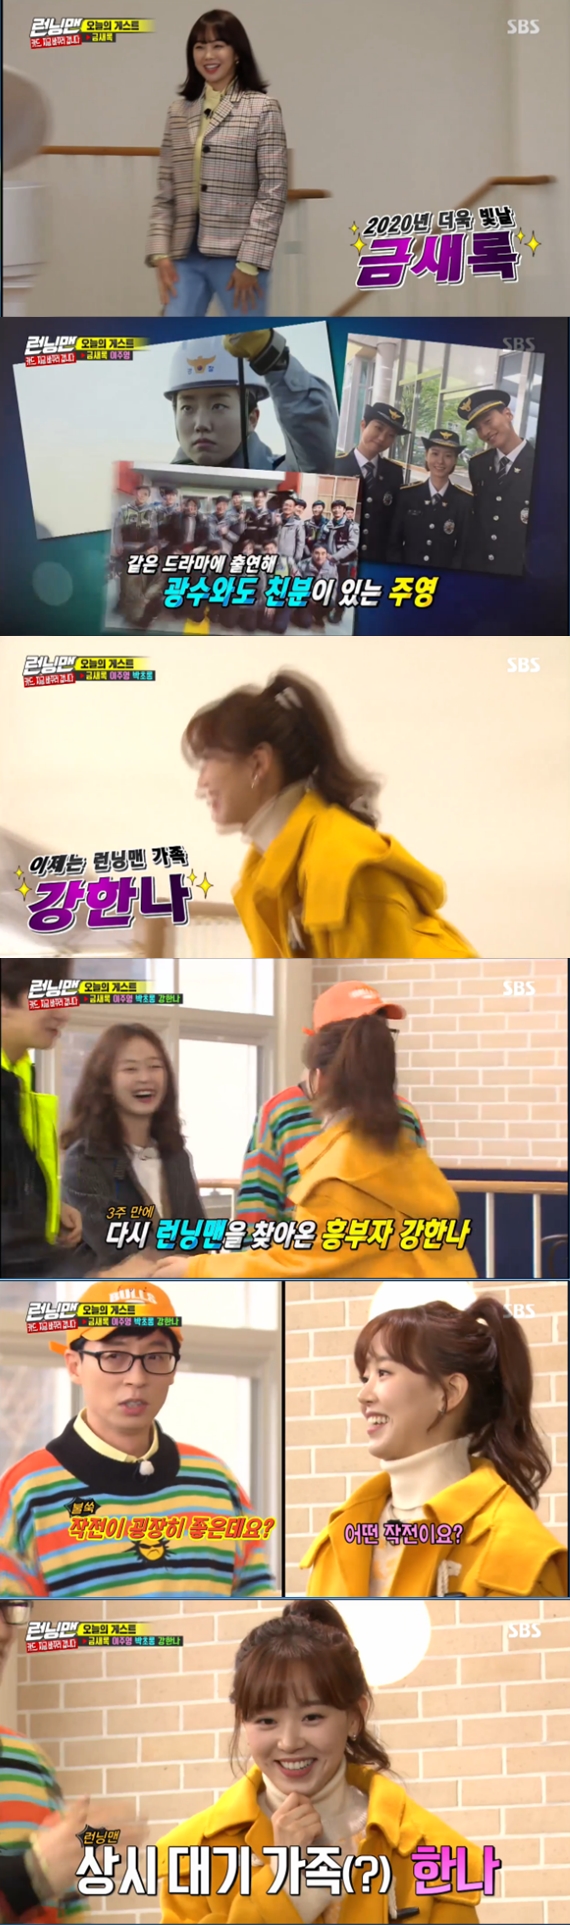 Kang Han-Na has appeared on Running Man again.In the SBS entertainment program Running Man broadcasted on the night of the 19th, Keum Sae-rok, Lee Ju-young, Park Chan-long and Kang Han-Na came out as guests and performed Race to change the card now with the members.Members were enthusiastically welcomed when Keum Sae-rok, who had a huge amount of talent in his last Running Man appearance, appeared.I didnt have any close friends in my last appearance, so this time I came out with Lee Ju-young, Keum Sae-rok said.Yoo Jae-Suk laughed, saying, Ji Suk-jin has never put an acquaintance in nine years, but he has put an acquaintance in only two appearances.Yoo Jae-Suk then saw Kang Han-Na, who reappeared in three weeks, and said, Is not it a family now?He said, I made a good strategy, he said, Is not this a member of the party? Kang Han-Na did not deny it.